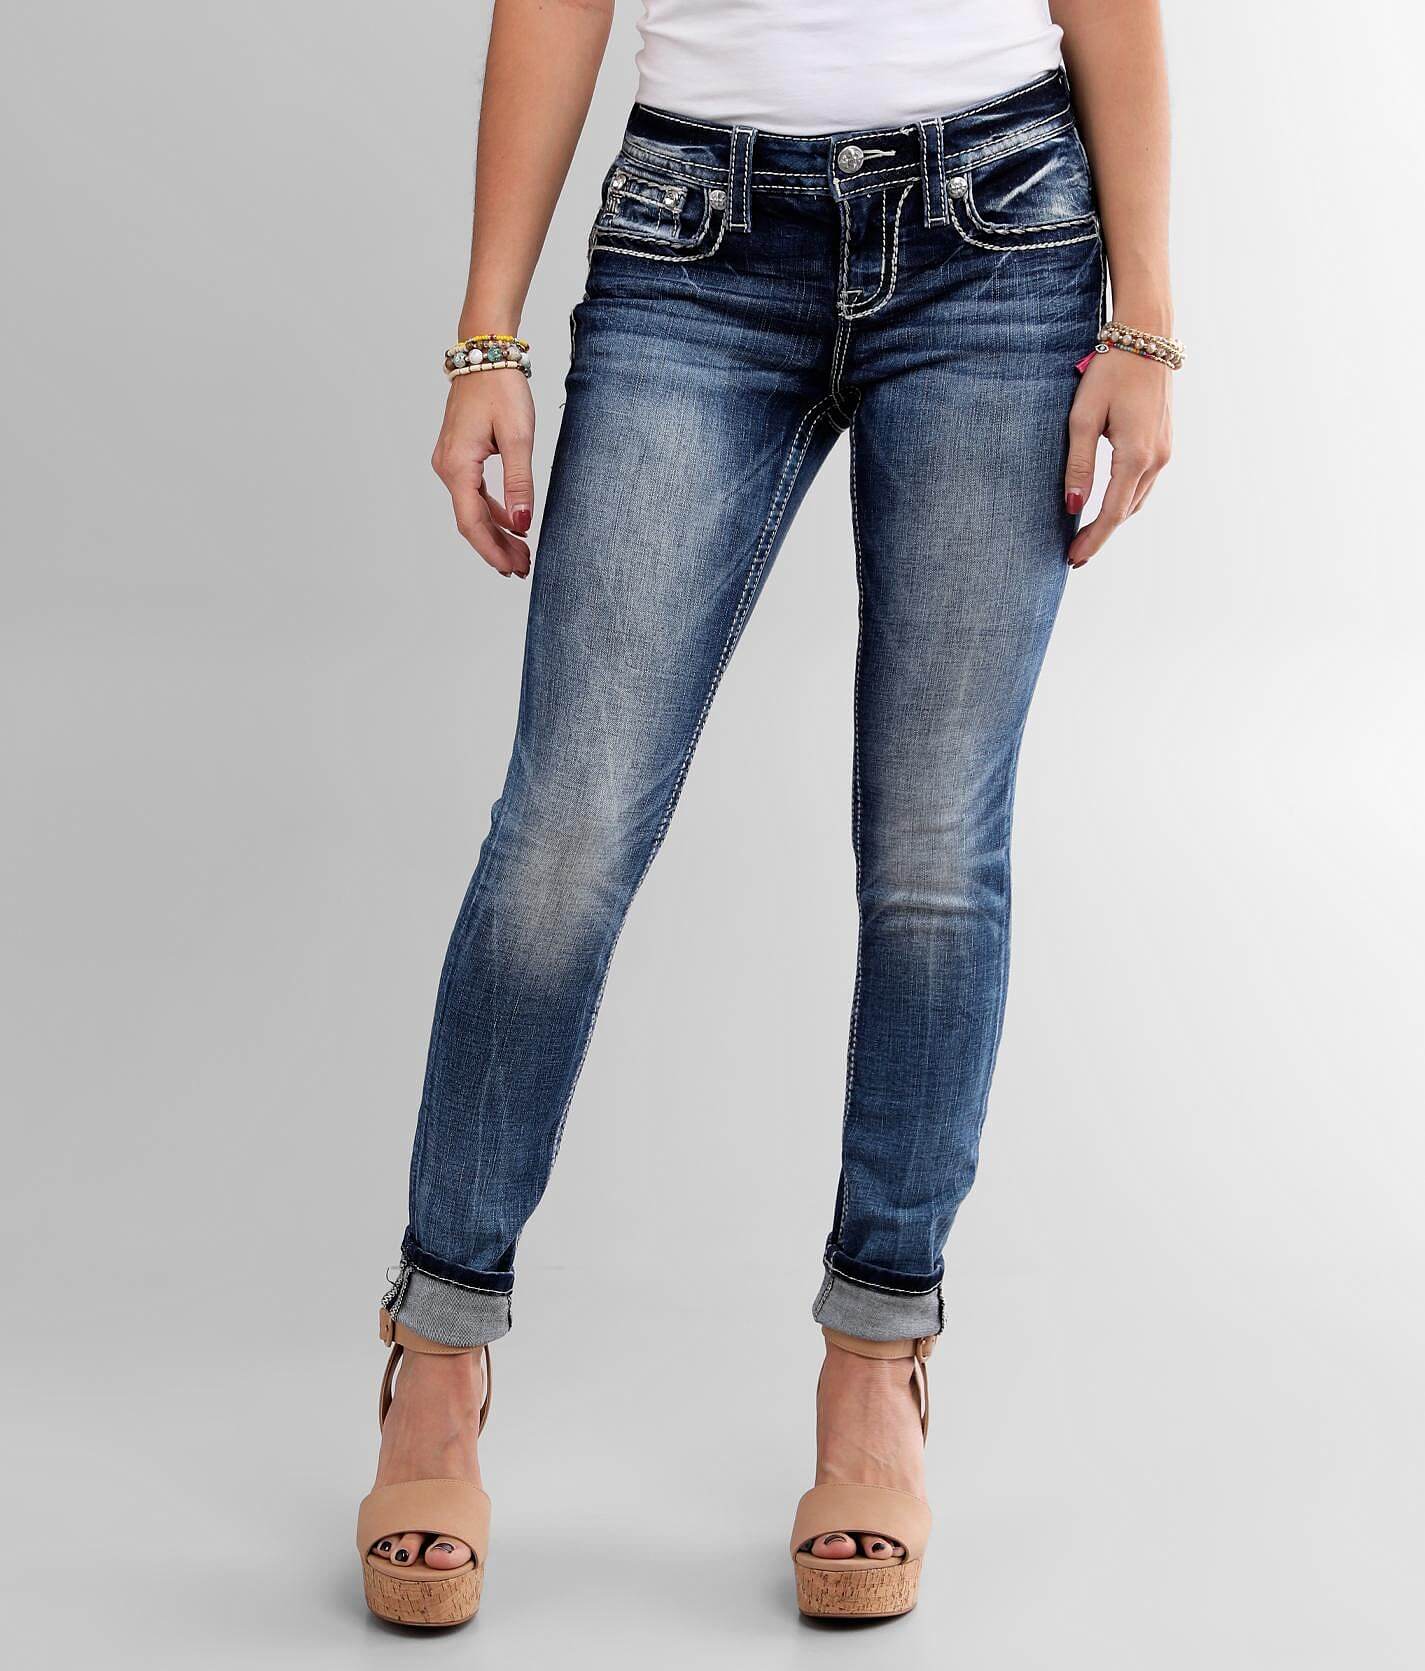 miss me hailey skinny jeans